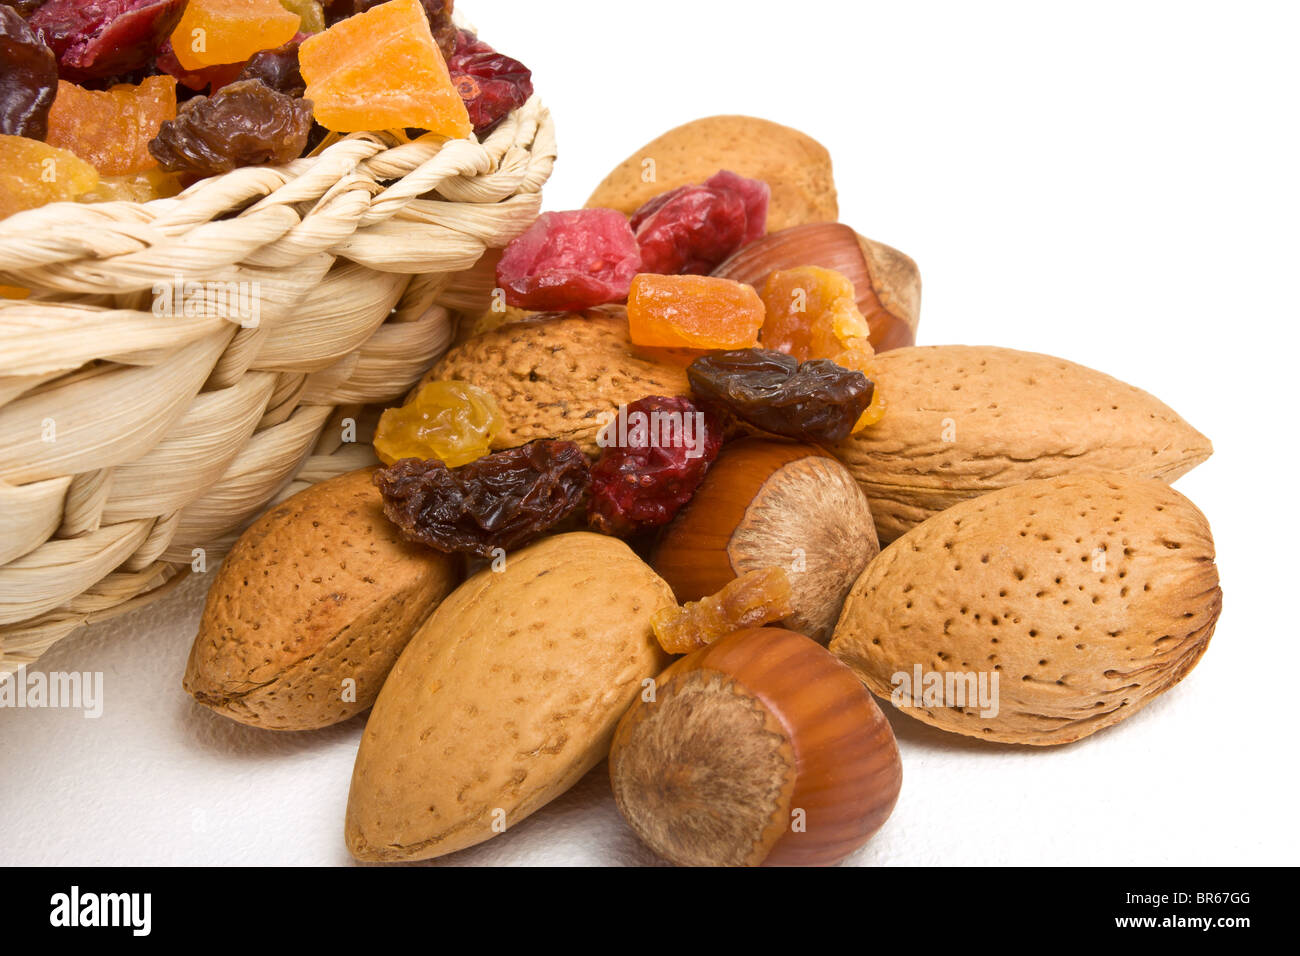 Mixed dried fruits and nuts spilling from basket on white background. Stock Photo